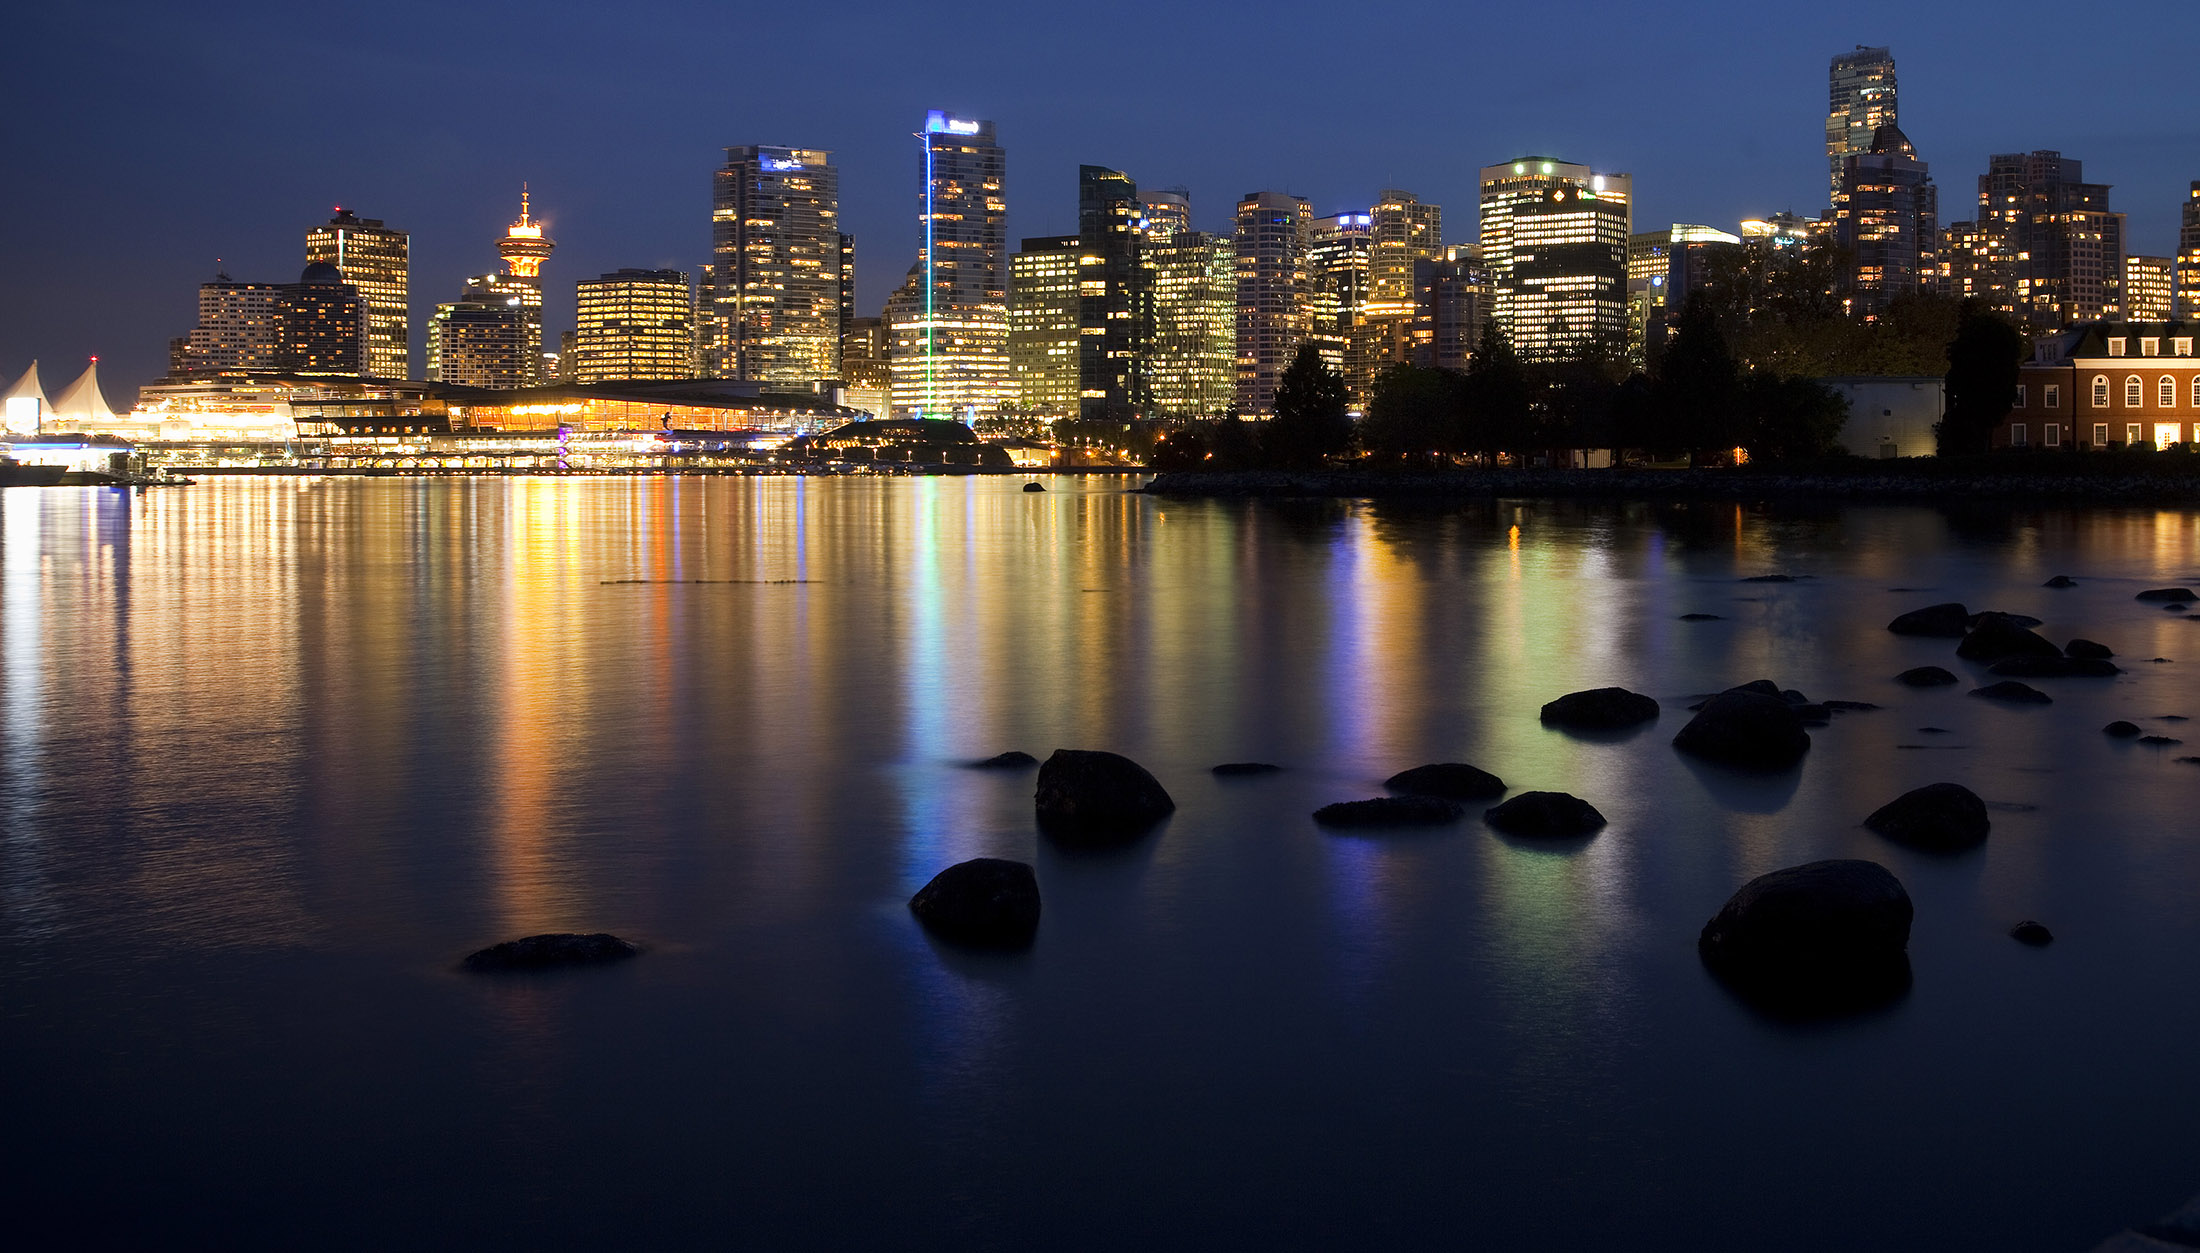 The city skyline is seen at night from Stanley Park in Vancouver, British Columbia, Canada.
